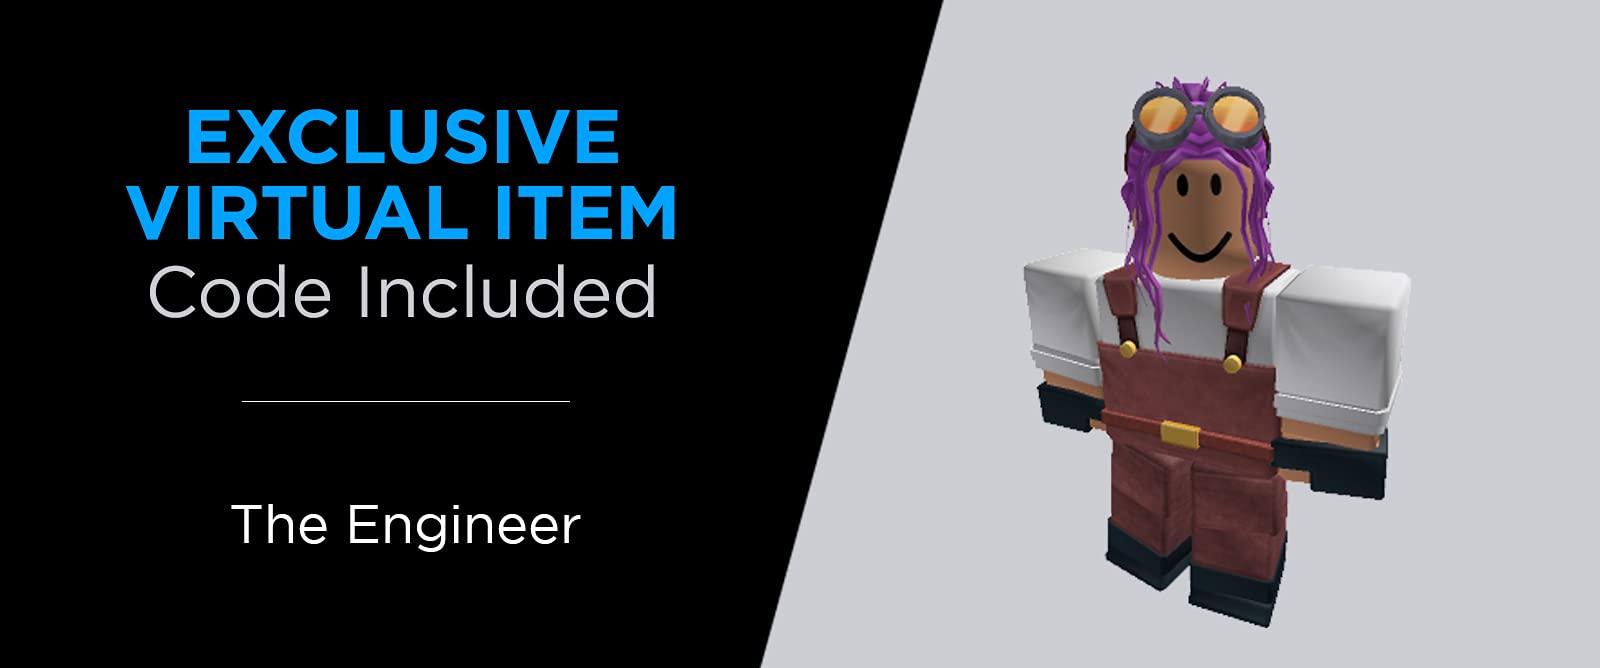 Roblox Action Collection - Tower Defense Simulator: Last Stand Playset [Includes Exclusive Virtual Item]